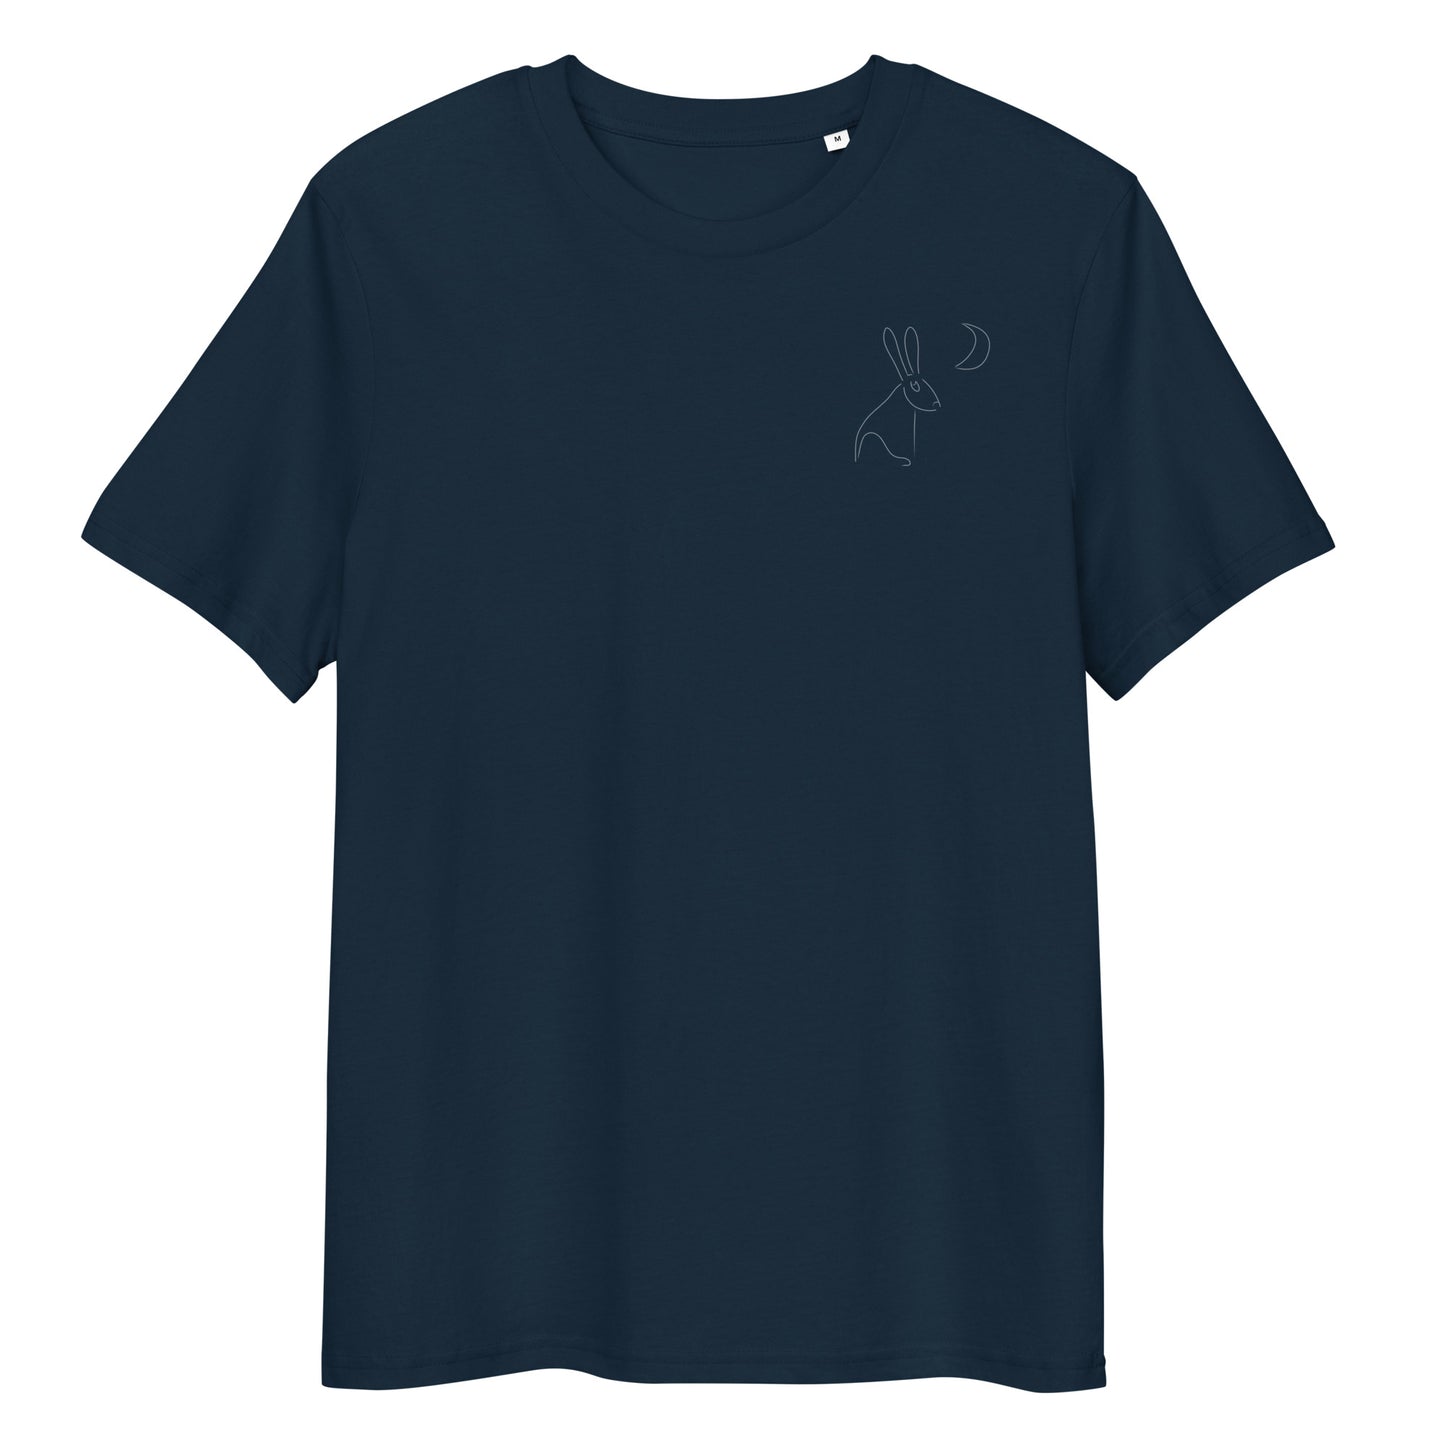 White Hare Stares at Moon | 100% Organic Cotton T Shirt in navy